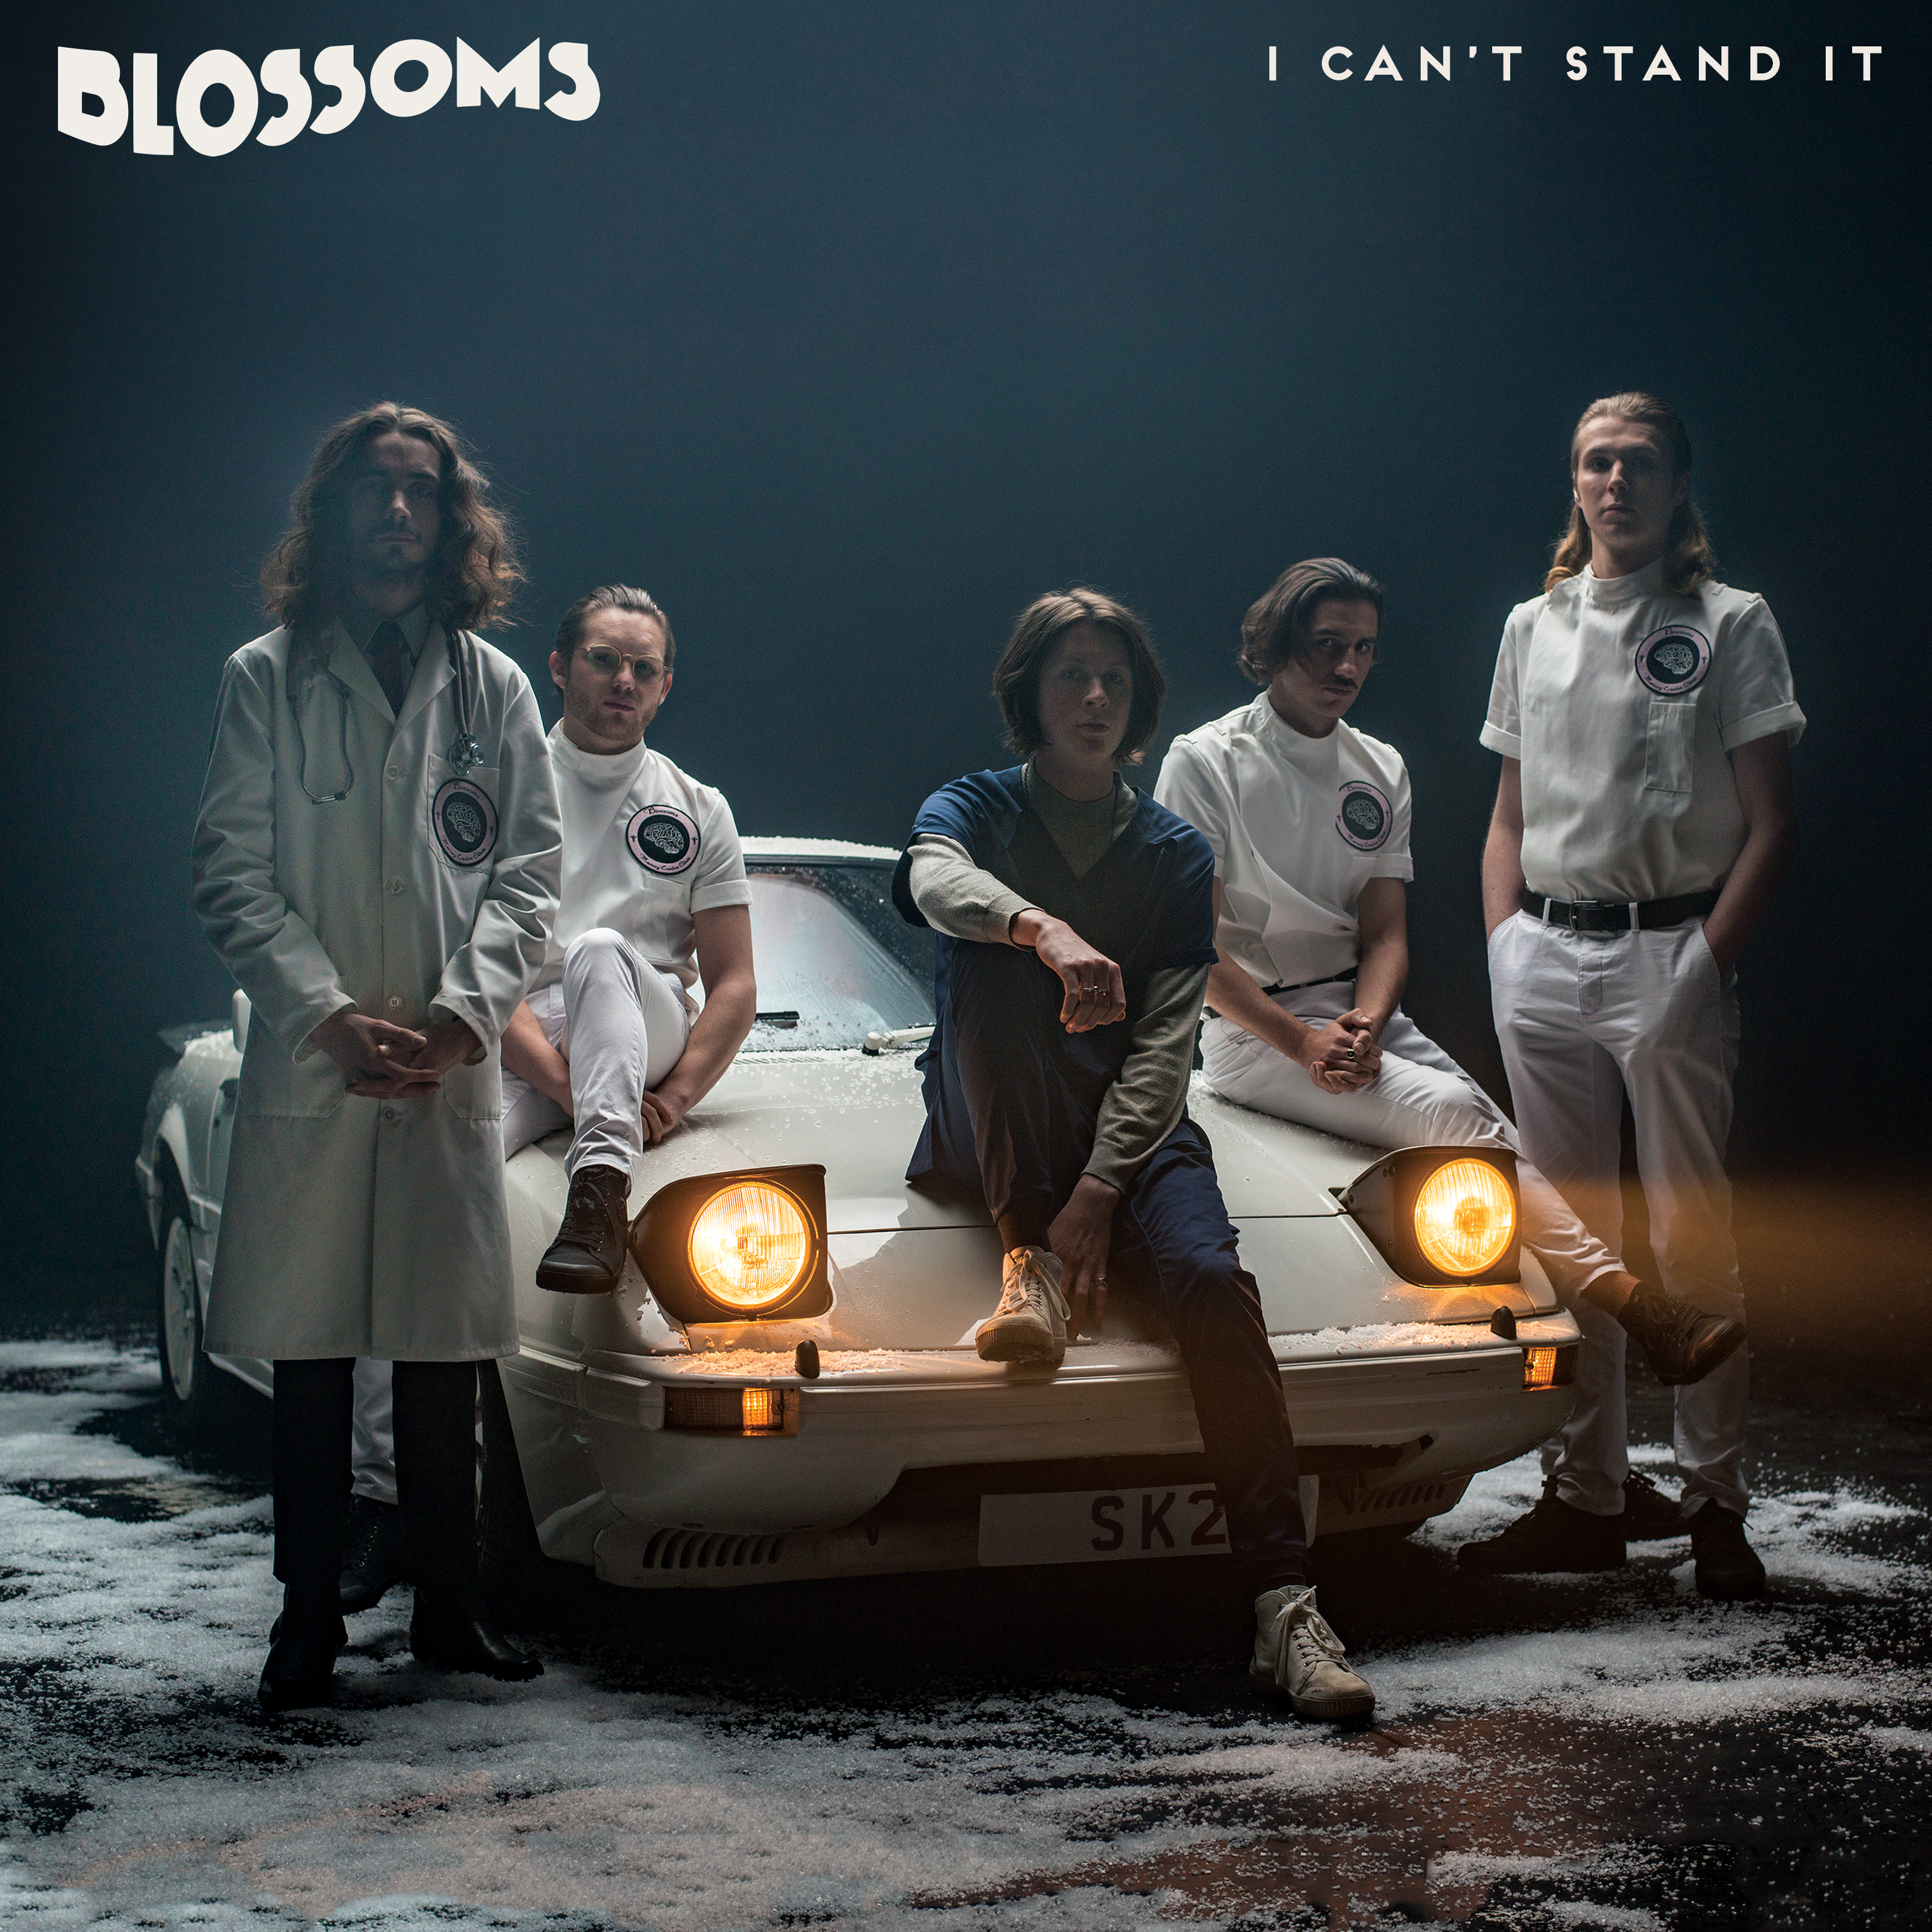 Blossoms I Can't Stand It single packshot